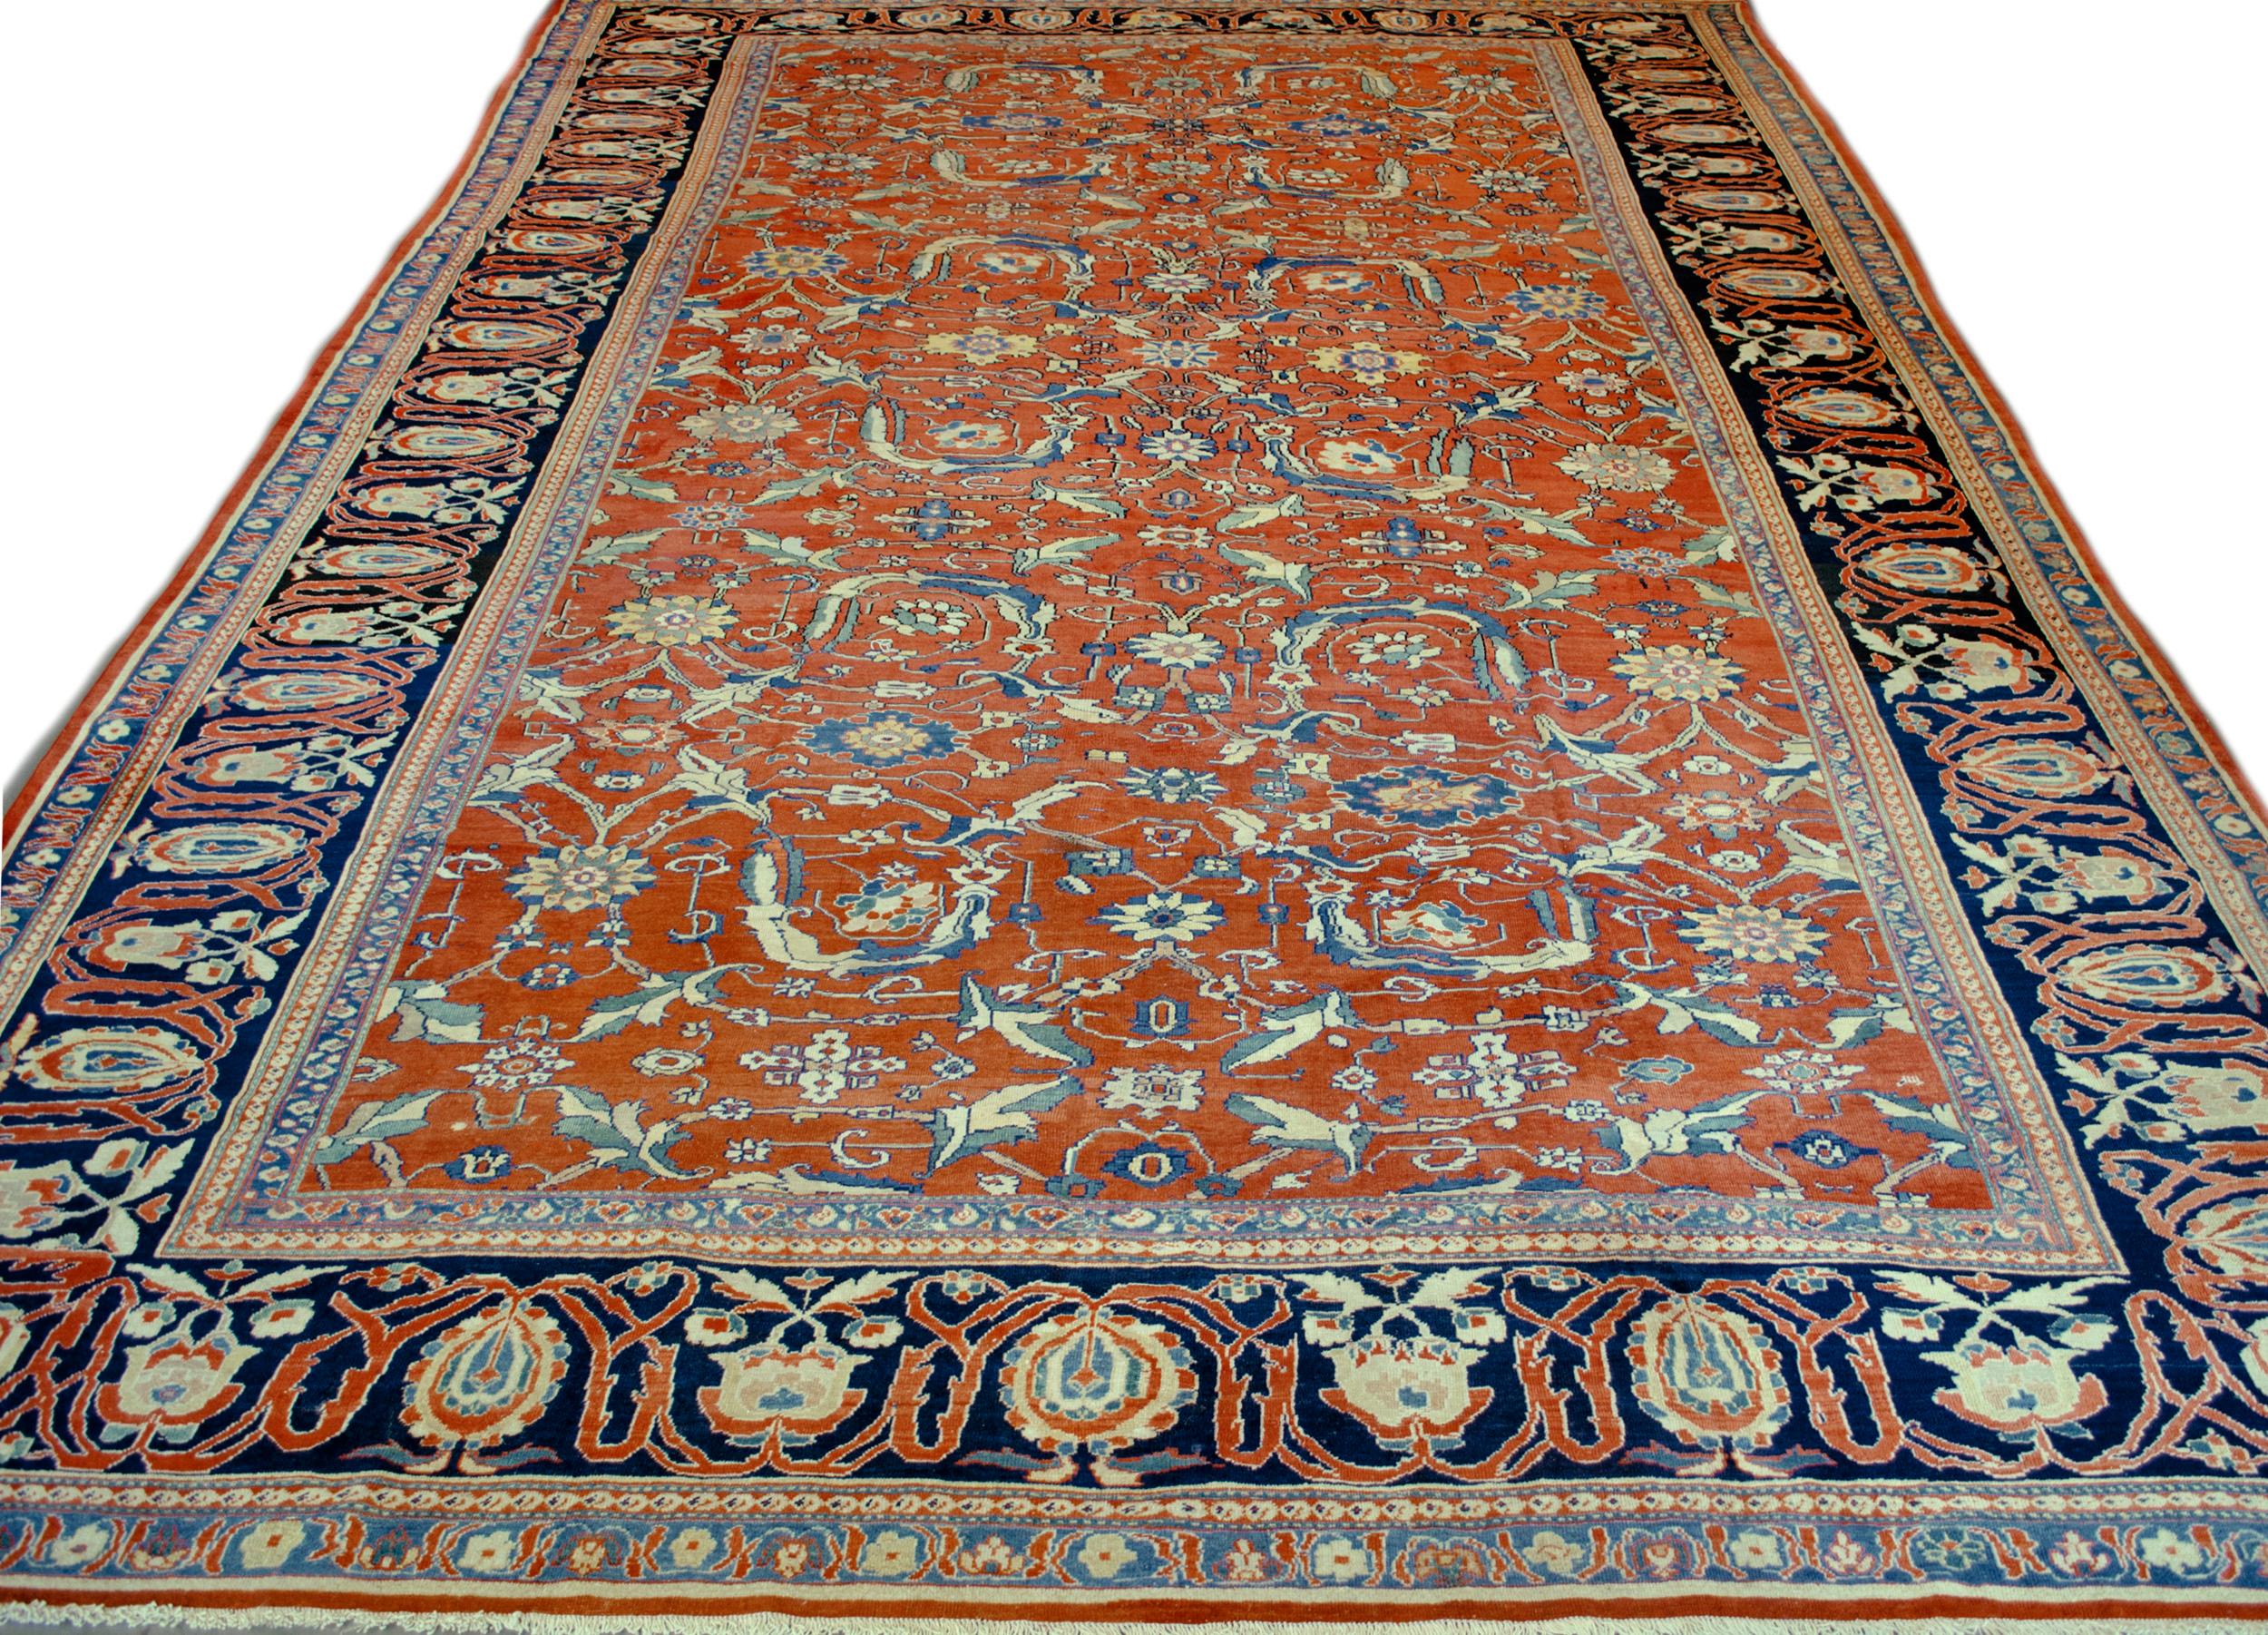 This traditional handwoven Persian Fereghan rug has a brick red field of rosette pendants issuing stylized vines forming lozenge lattice, enclosing further fine floral motif, in a charcoal linked cypress tree and palmette border, between a profusion